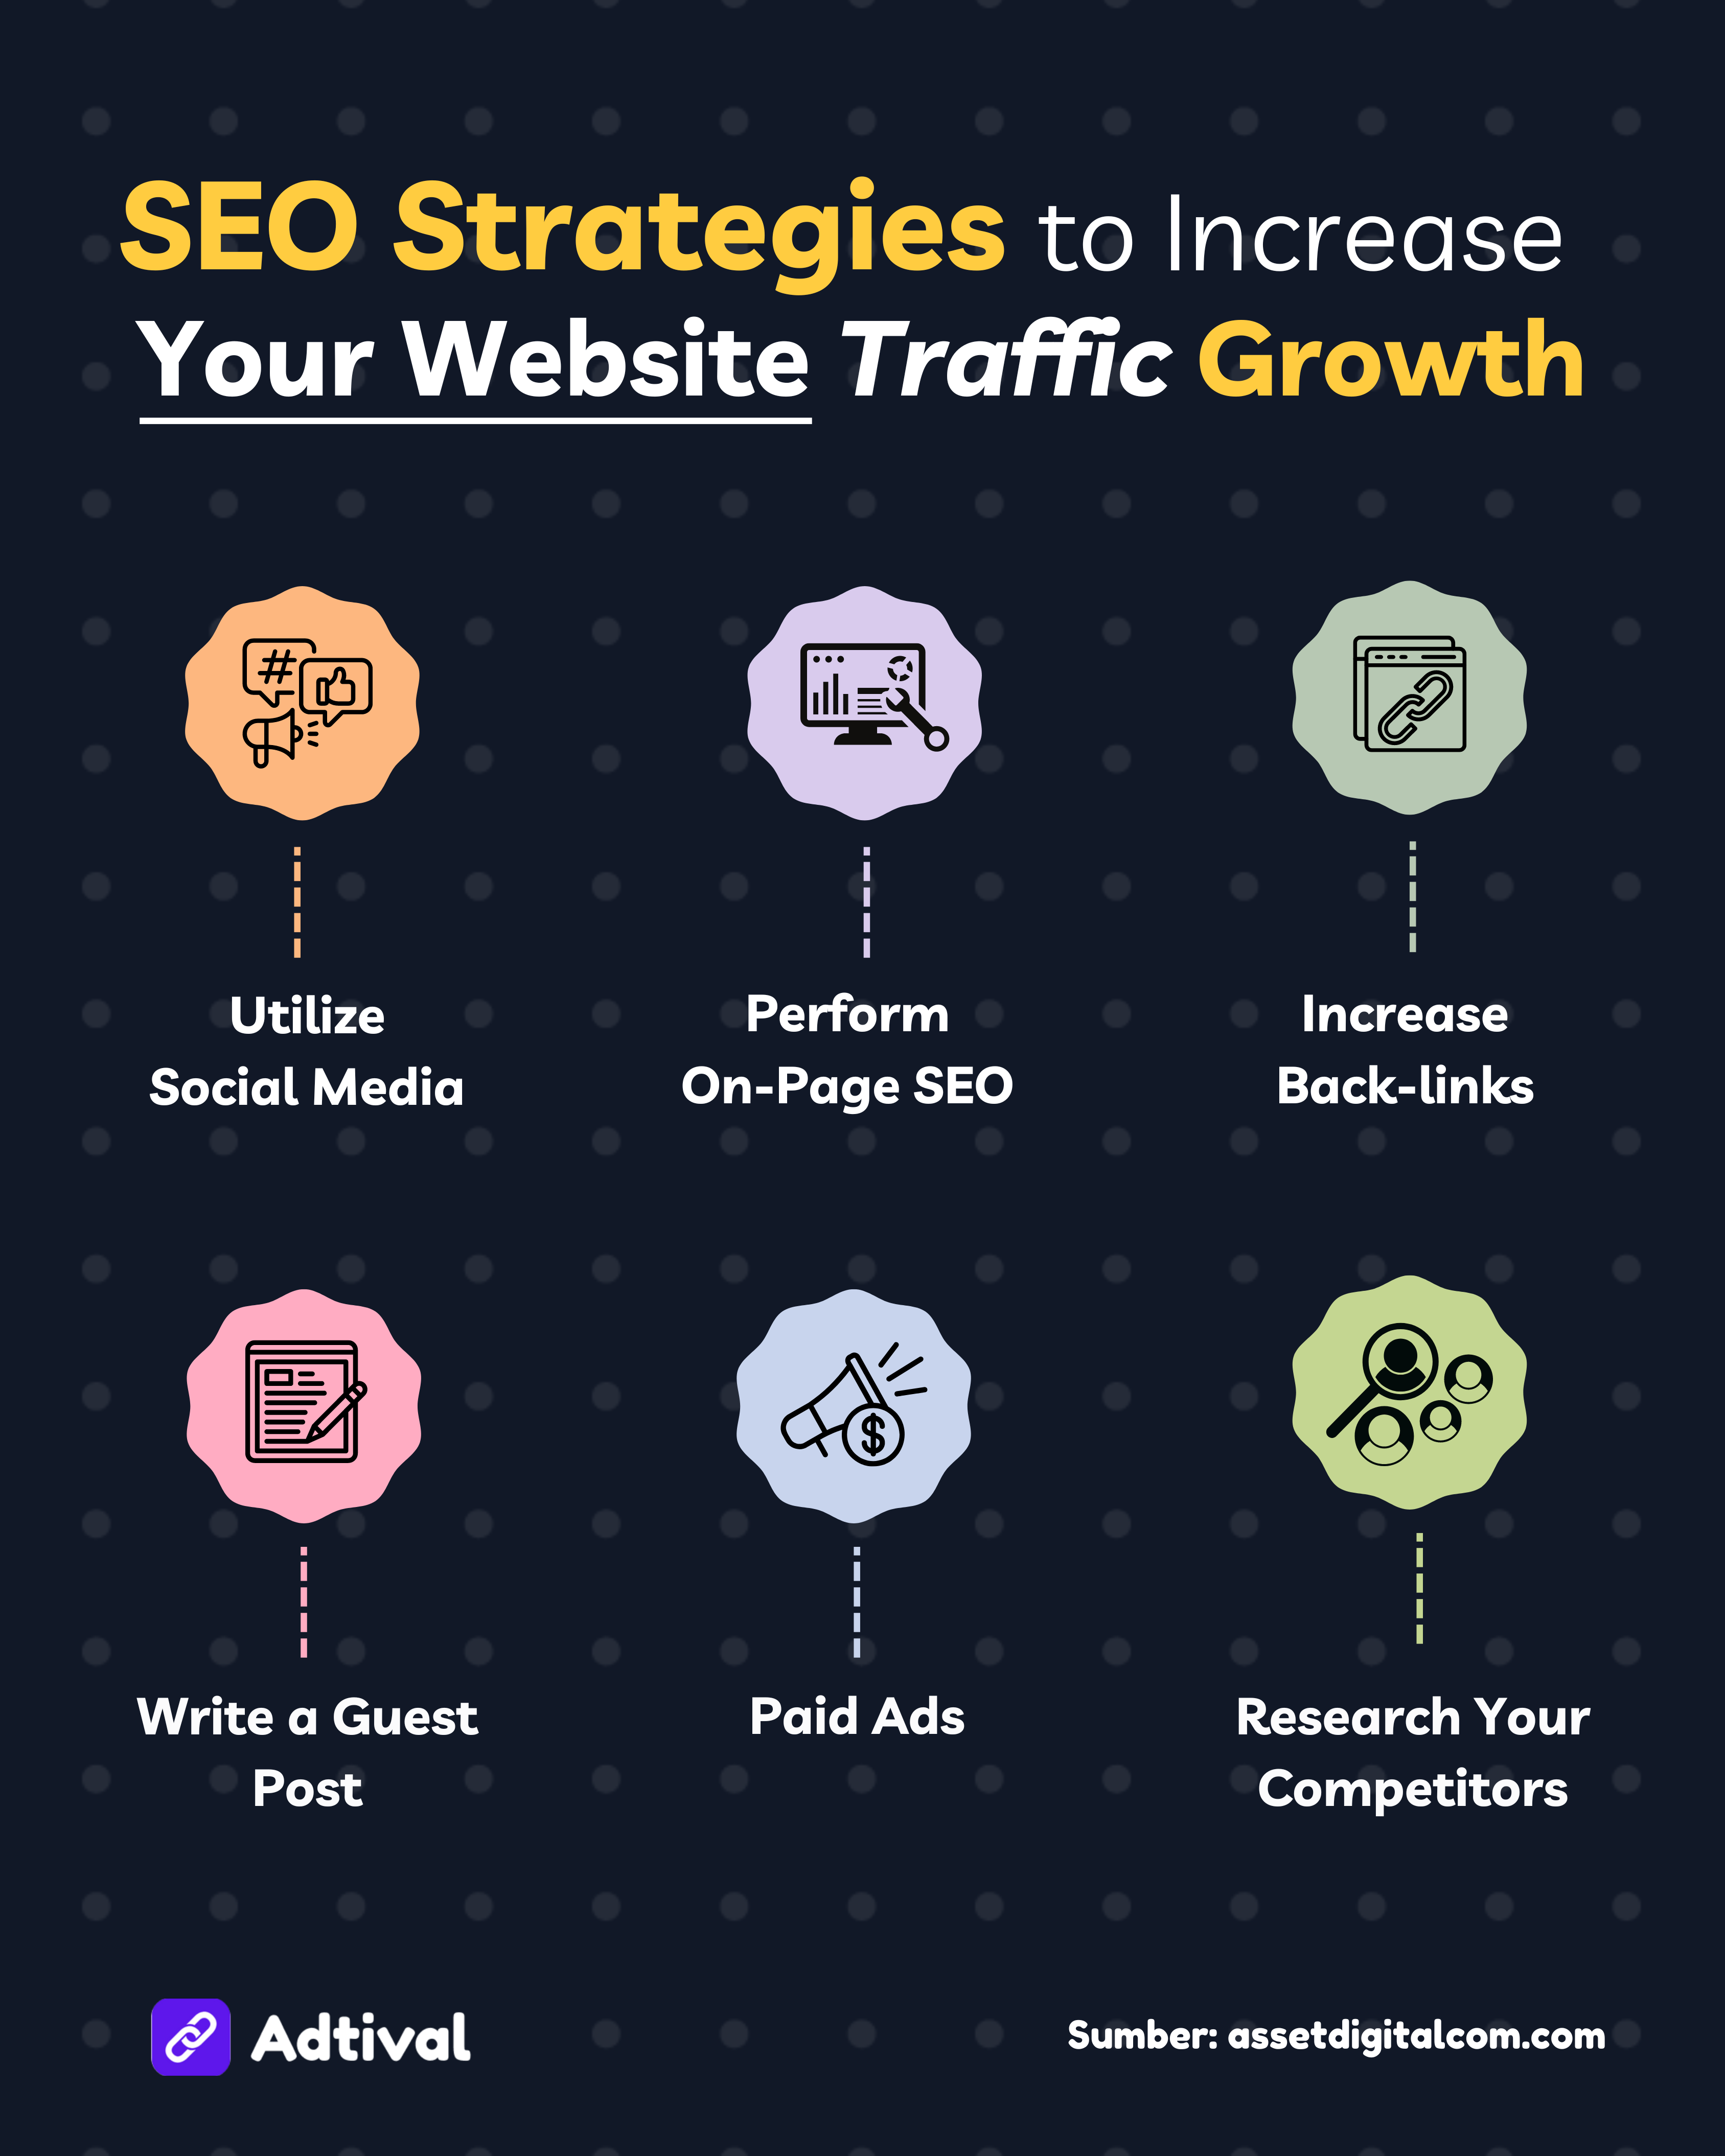 SEO Strategies to Increase Your Website Traffic Growth